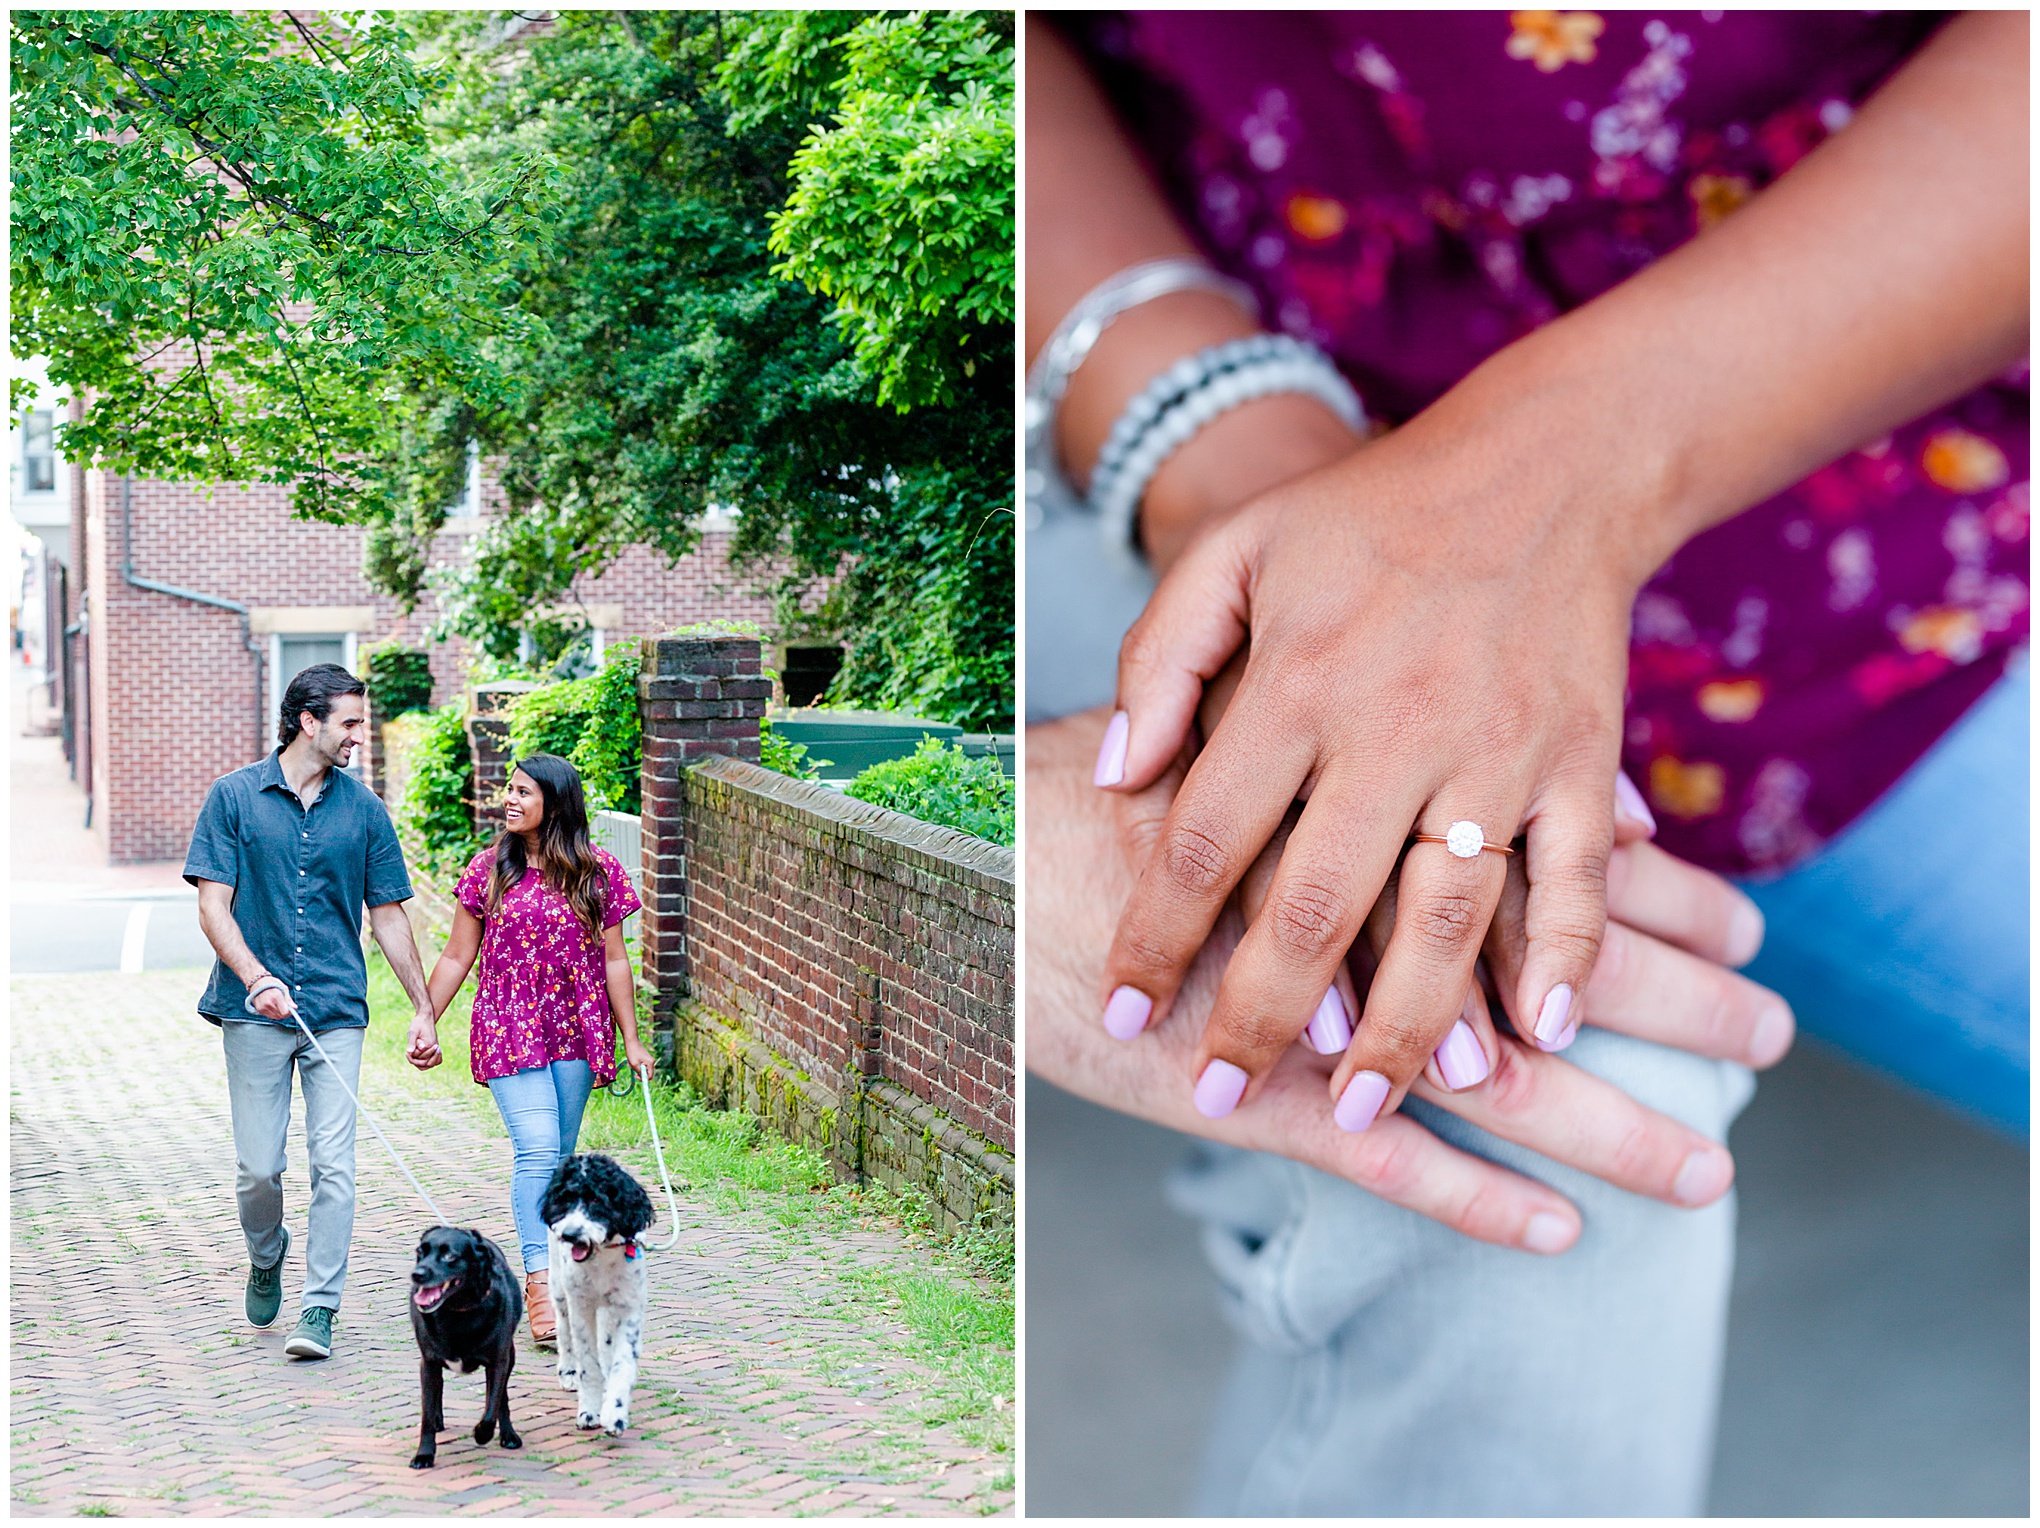 Old Town Alexandria engagement photos, Alexandria engagement photos, Old Town Alexandria photos, Old Town Alexandria, Alexandria engagement photos, Alexandria Virginia, classic engagement photos, historic town engagement photos, engagement photos, Rachel E.H. Photography, couple walking dogs